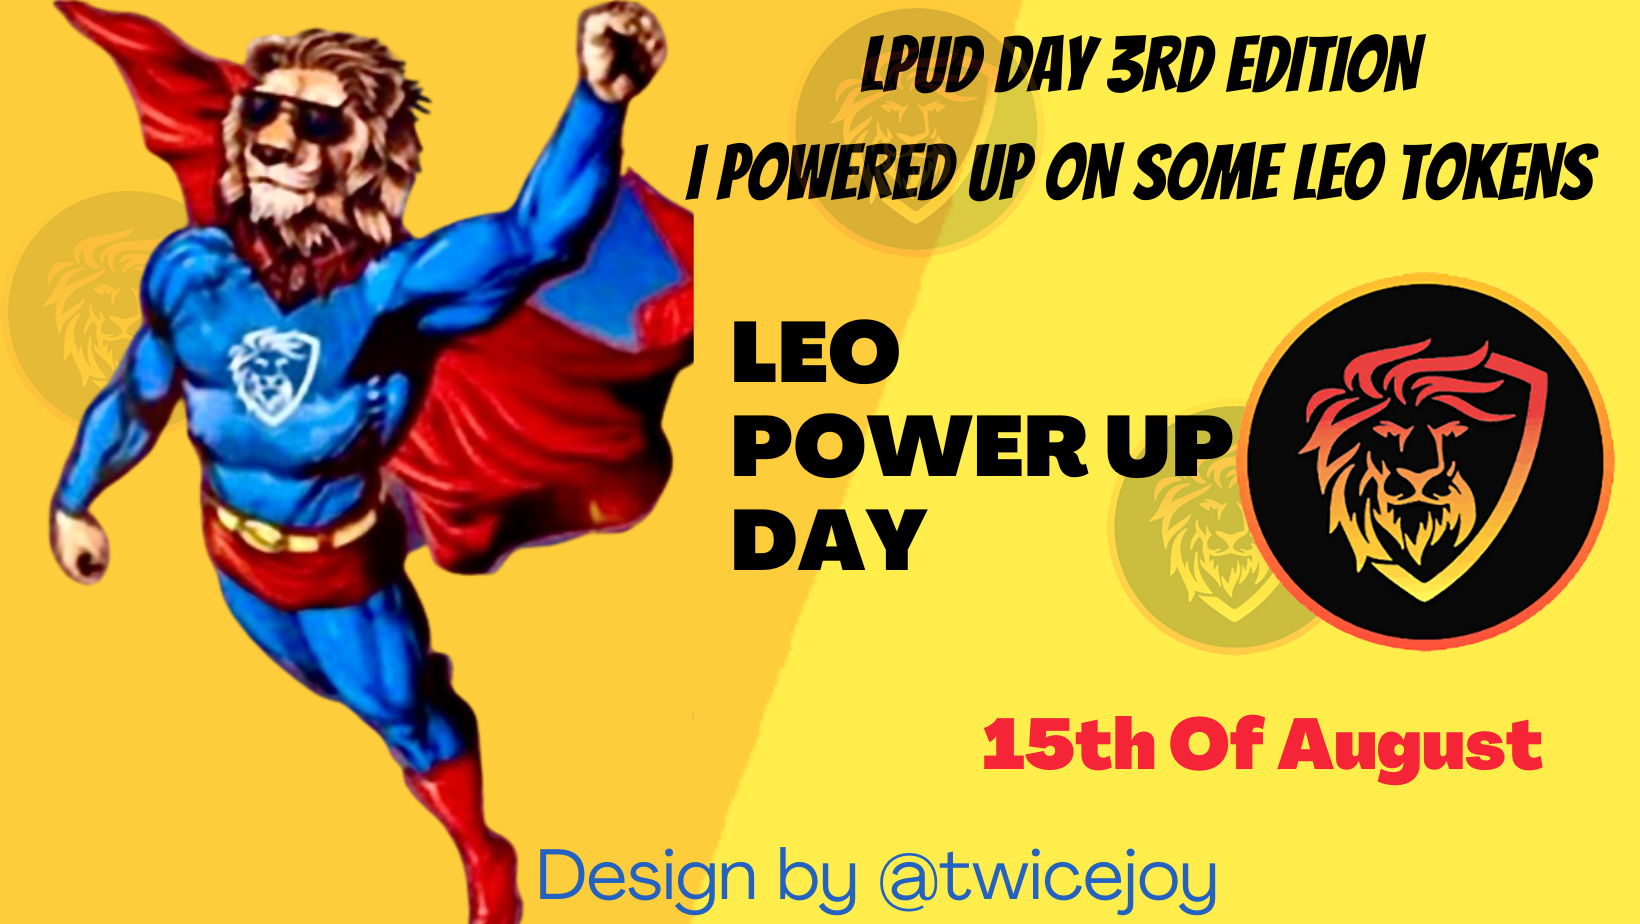 @twicejoy/lpud-day-third-edition-i-powered-up-some-leo-tokens